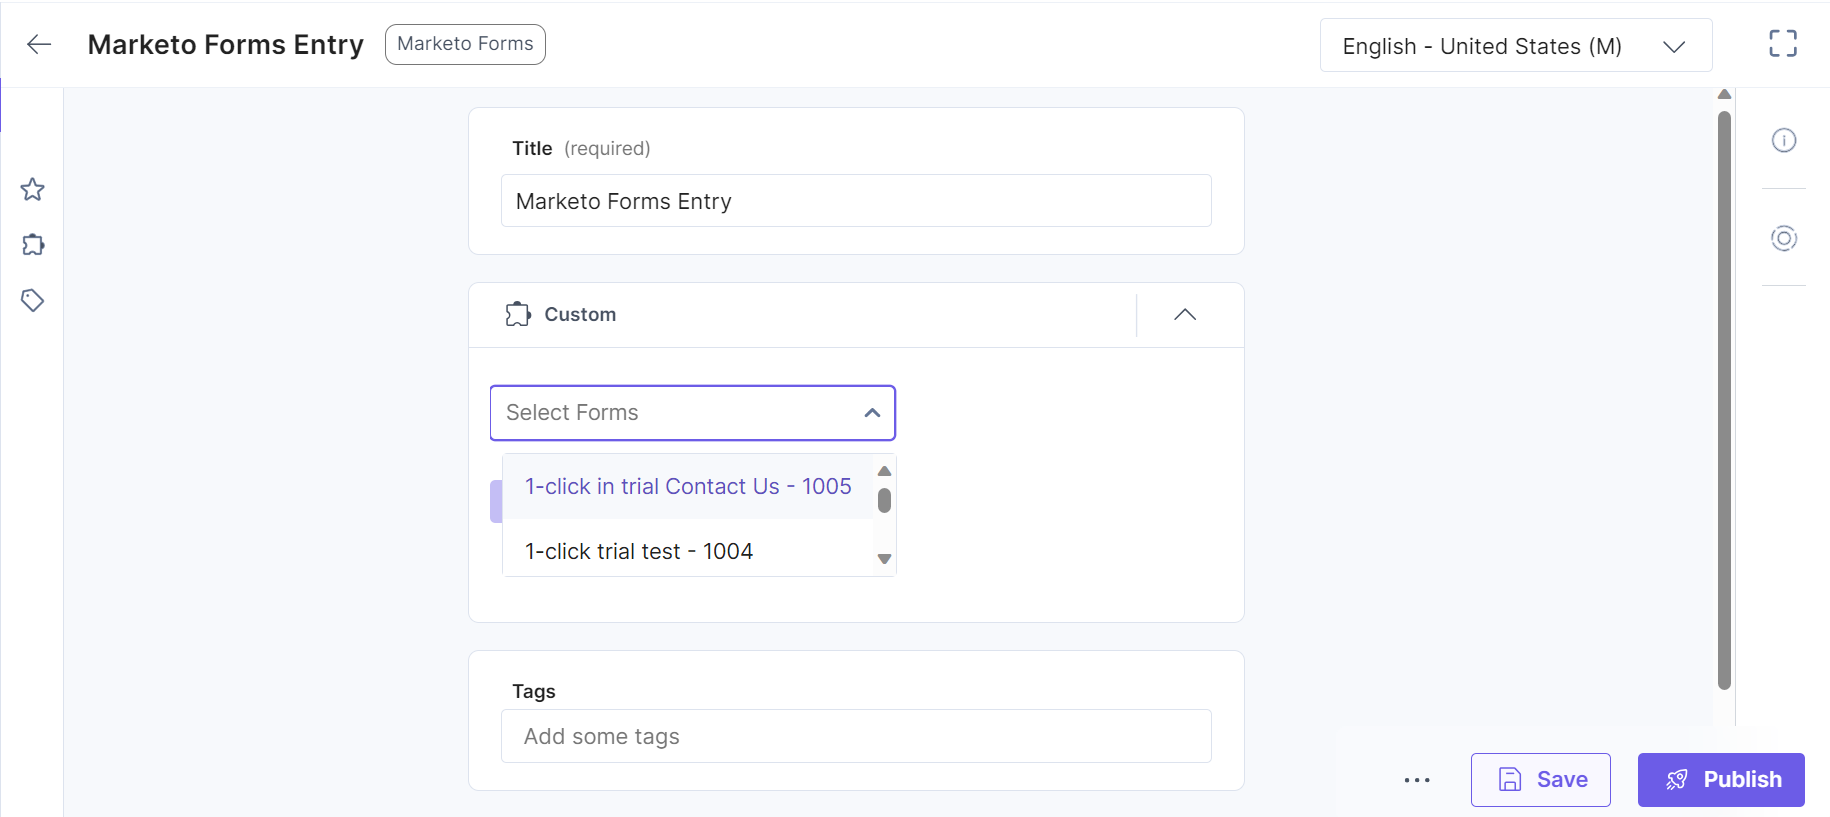 5_Marketo_Forms_Entry.png